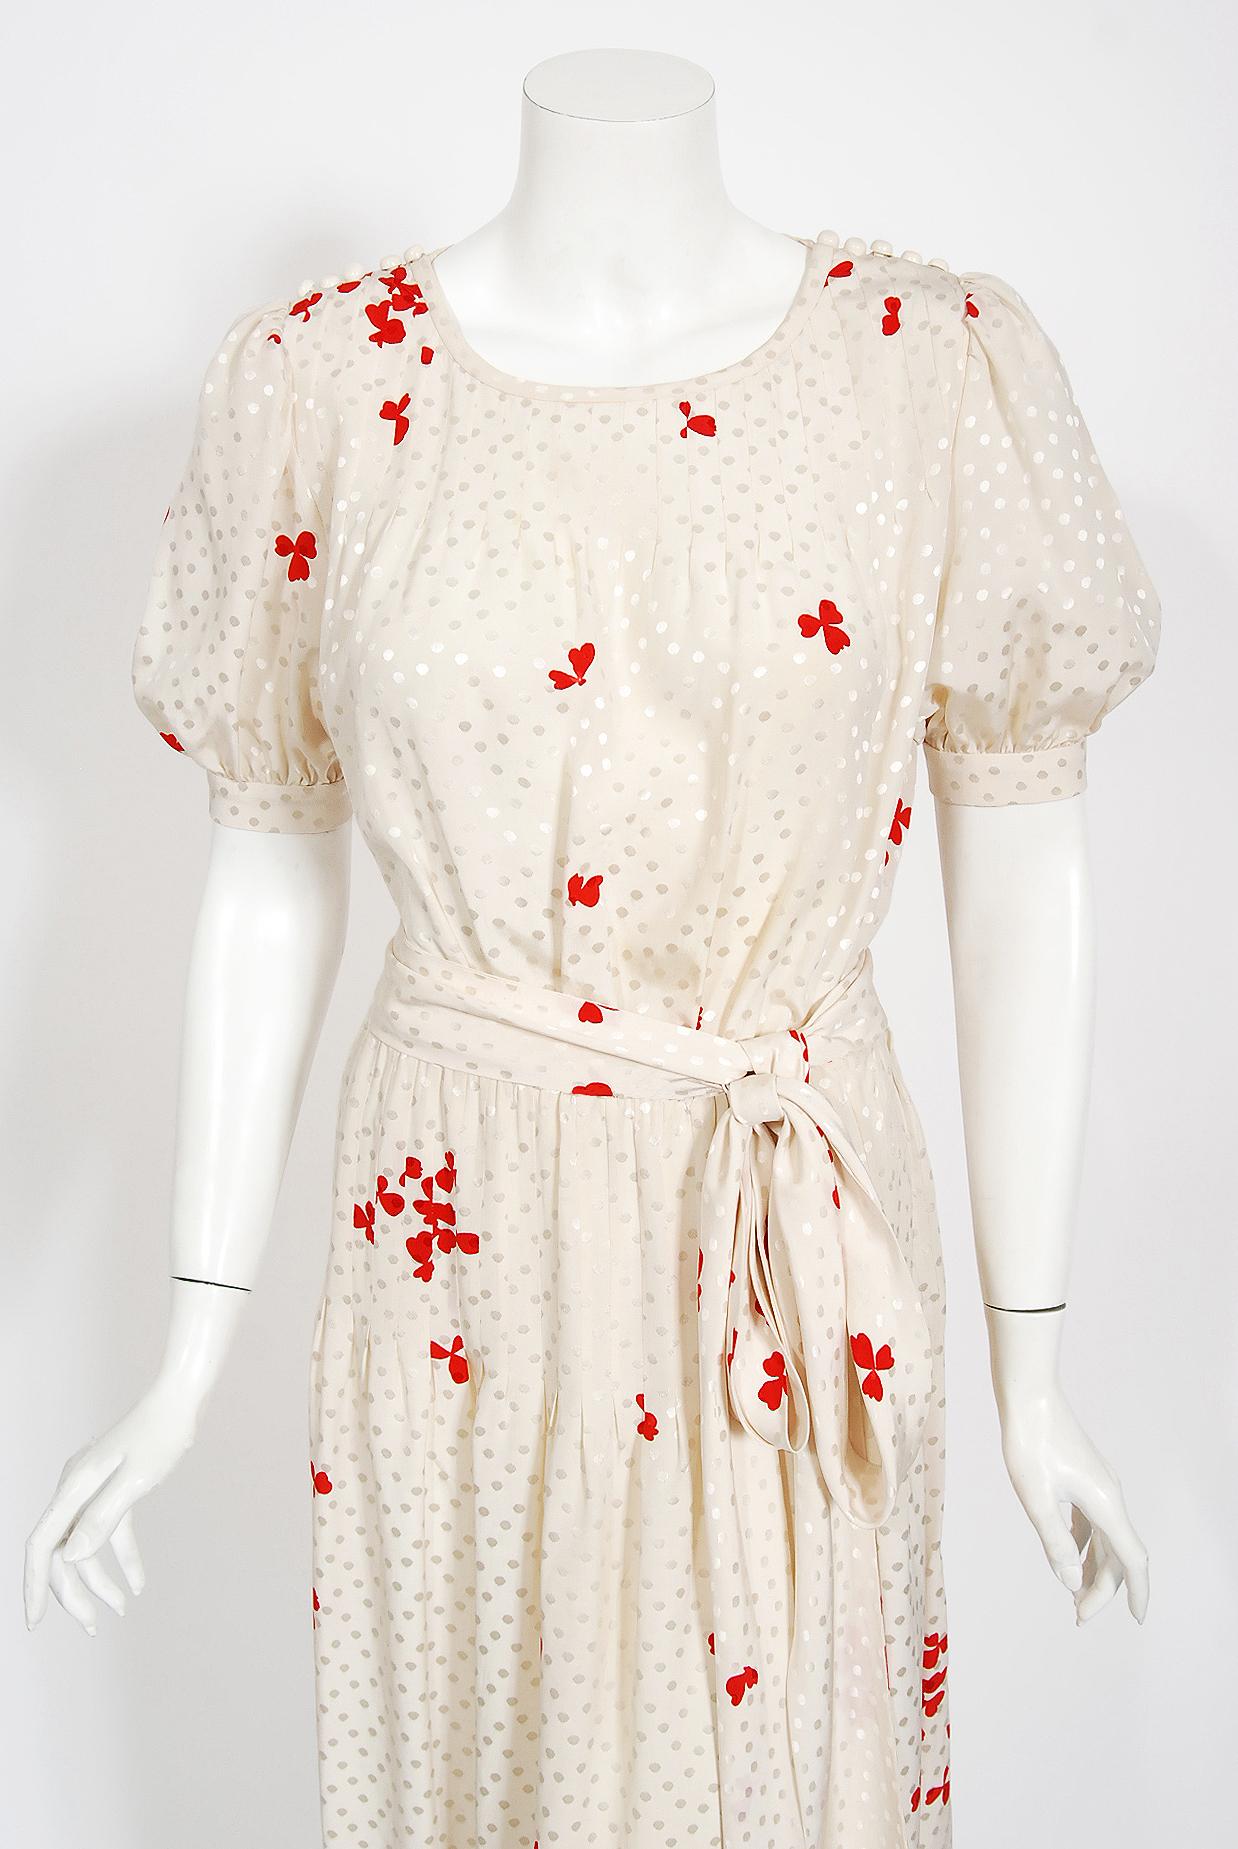 Gorgeous Yves Saint Laurent ivory dotted red-clover print silk dress ensemble from his 1978 spring/summer collection. Such a rarity to find all three pieces together! The dress is so chic with the shoulder buttons and short puff-sleeves. I adore the